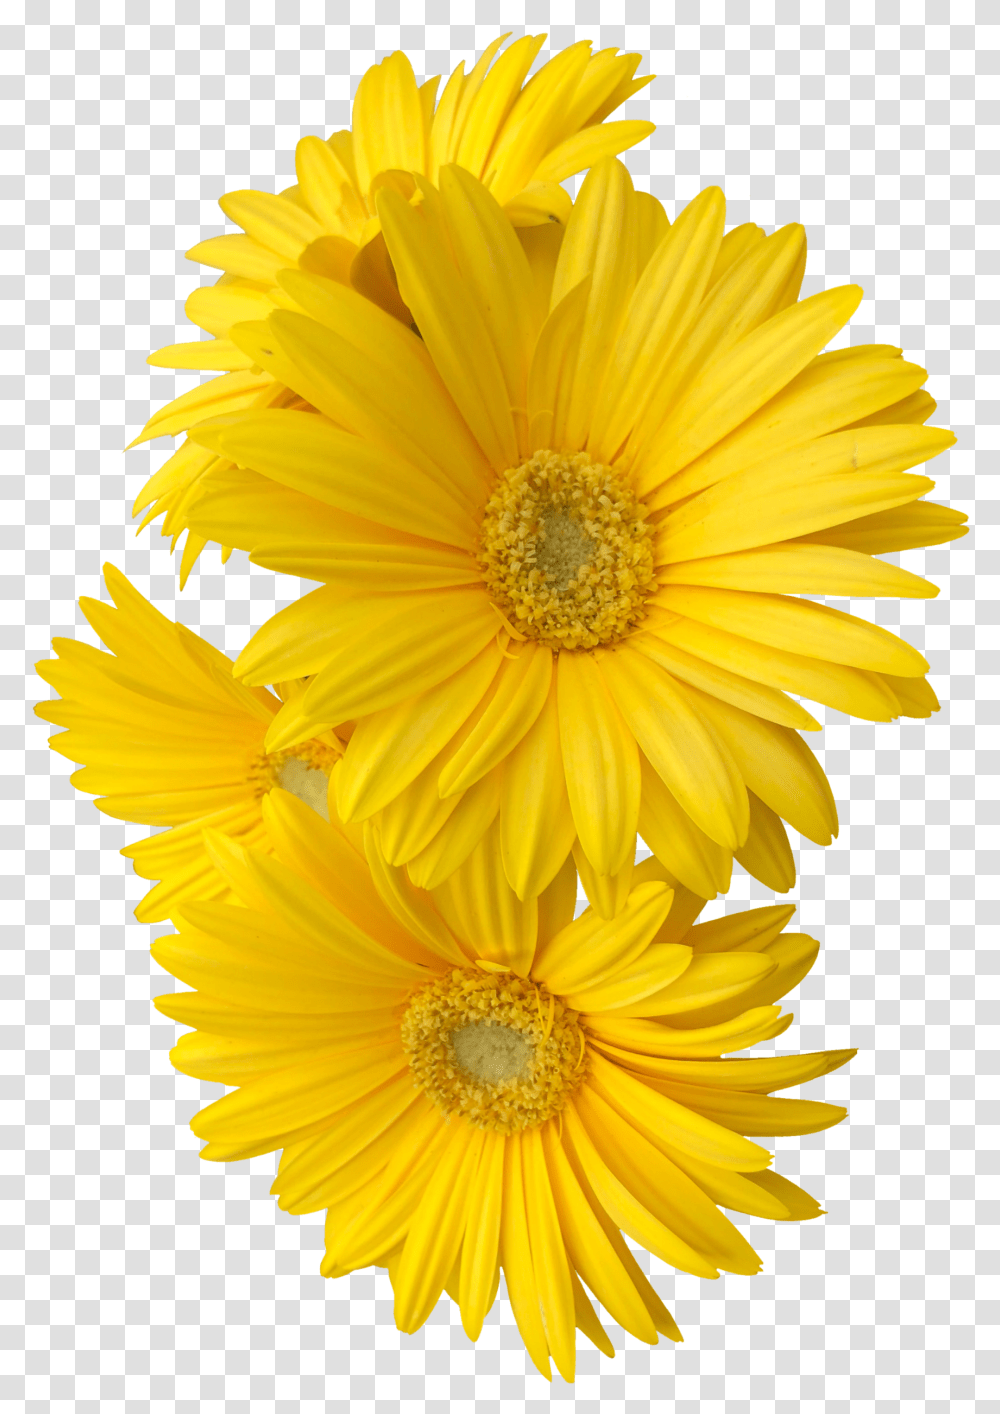 Yellow Daisy Flower Flowers Freetoedit Yellow Flower, Plant, Blossom, Daisies, Pollen Transparent Png